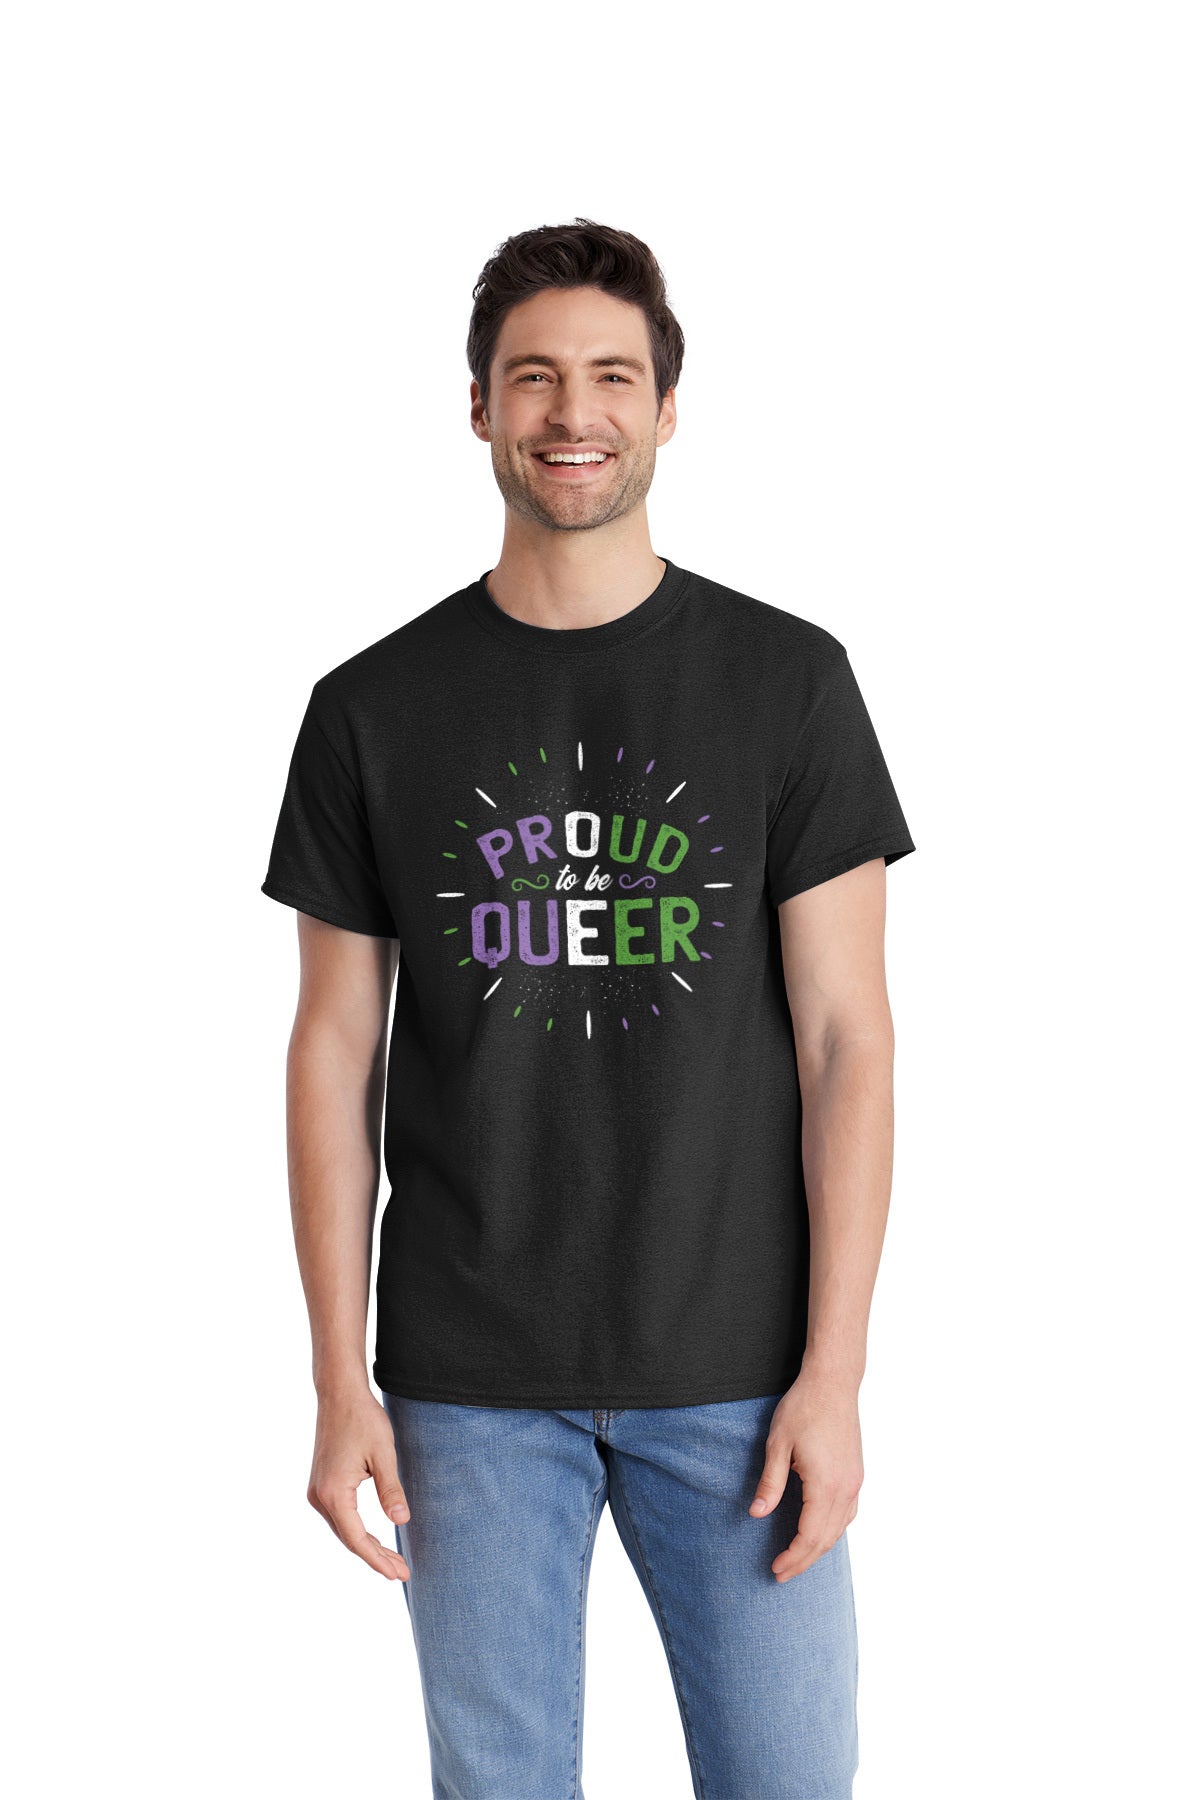 A man proudly expressing his LGBTQ+ identity with a Proud to Be Queer T-Shirt.